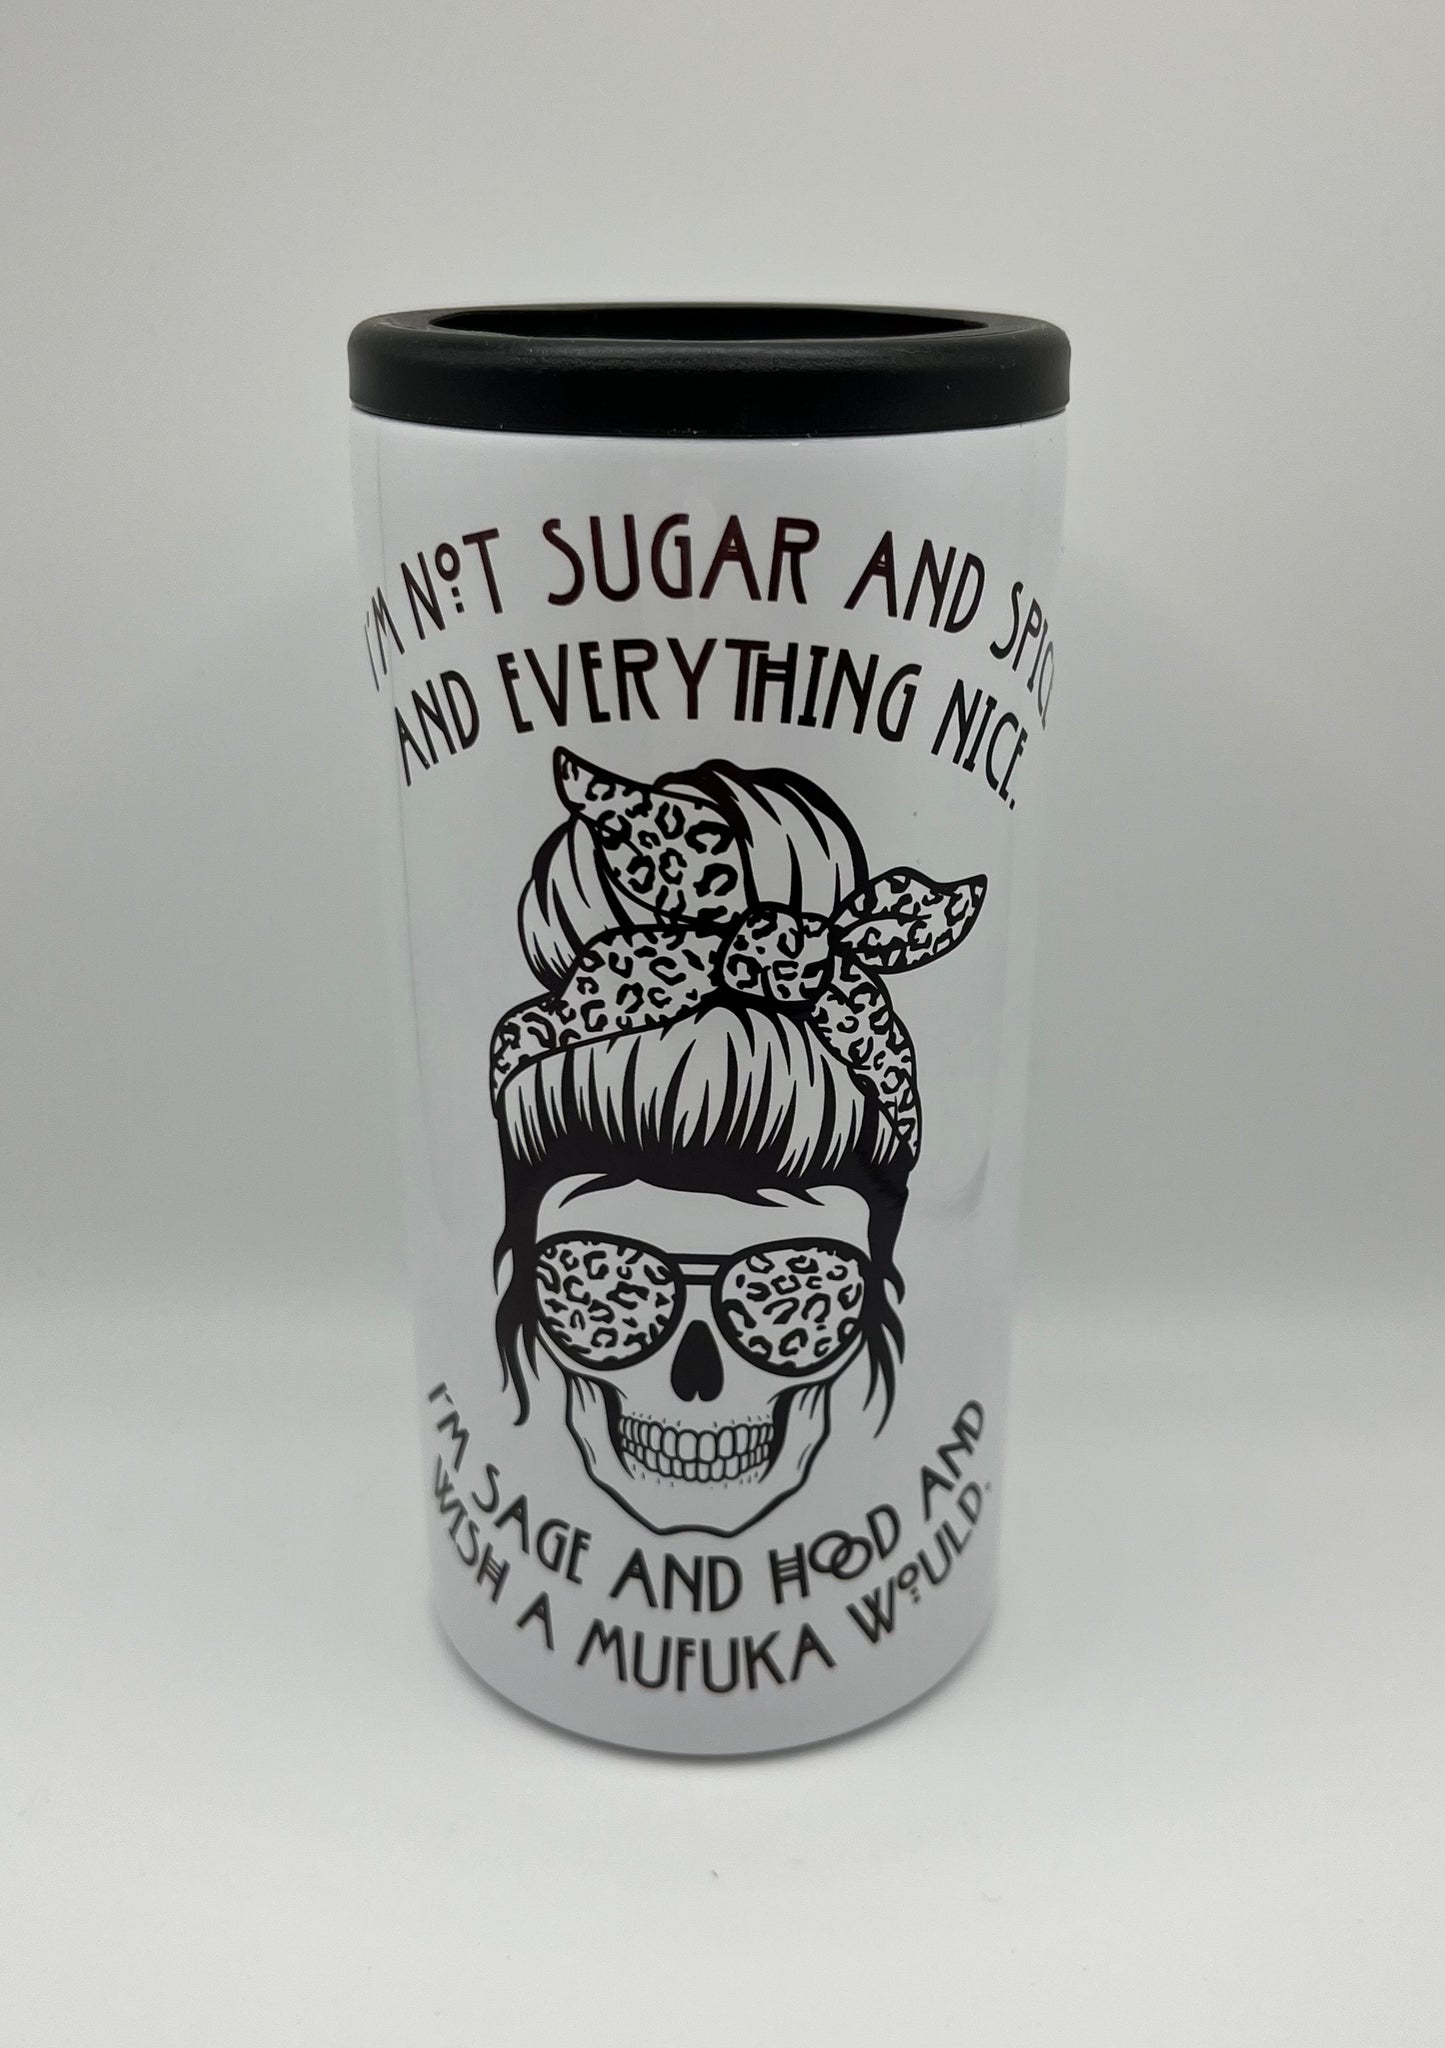 “Sage, Hood, Wish a Mufuka Would” 16oz Tall Can Drink Coozie